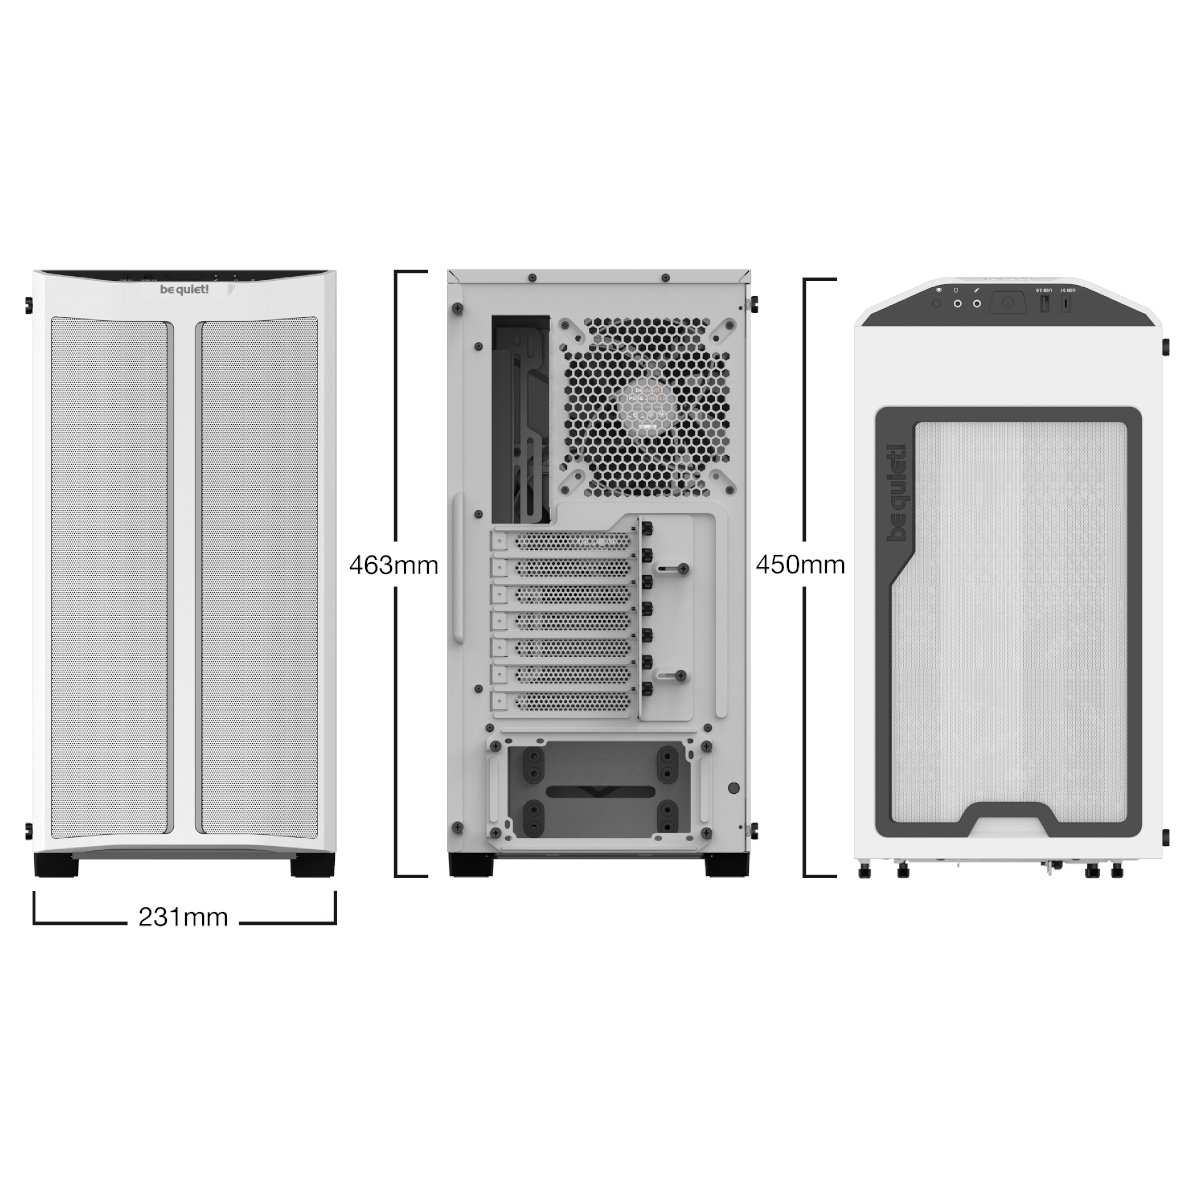 be quiet! - be quiet! Pure Base 500DX ARGB Midi Tower Case - White Tempered Glass